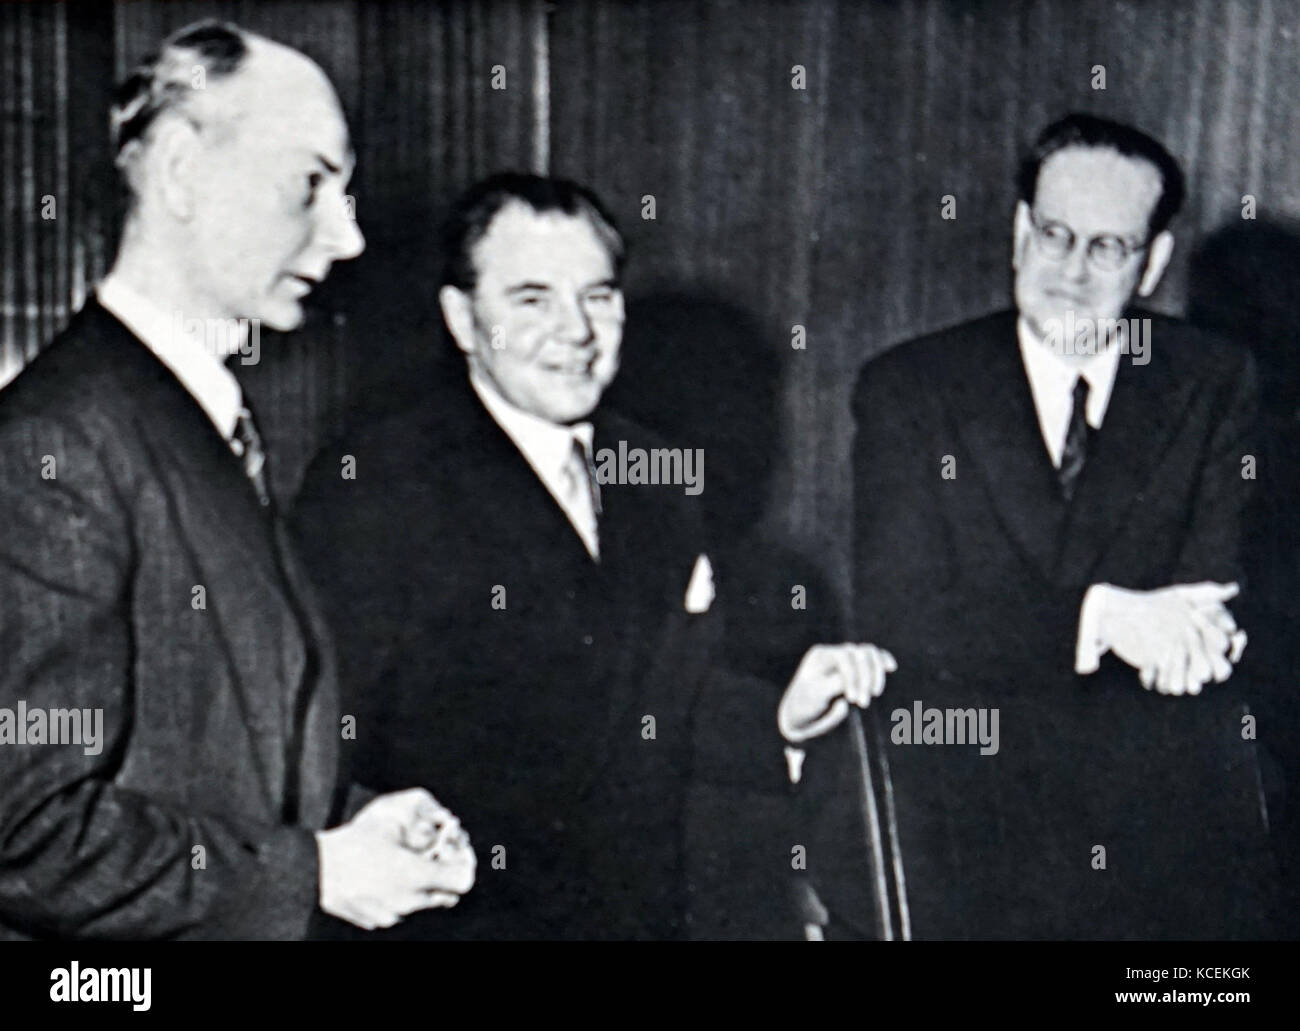 Photograph of Scandinavian Premiers meeting in Stockholm. Left to Right: Einar Gerhardsen (1897-1987) Prime Minister of Norway, Hans Hedtoft (1903-1955) Prime Minister of Denmark, and Tage Erlander (1901-1985) Prime Minister of Sweden. Dated 20th Century Stock Photo